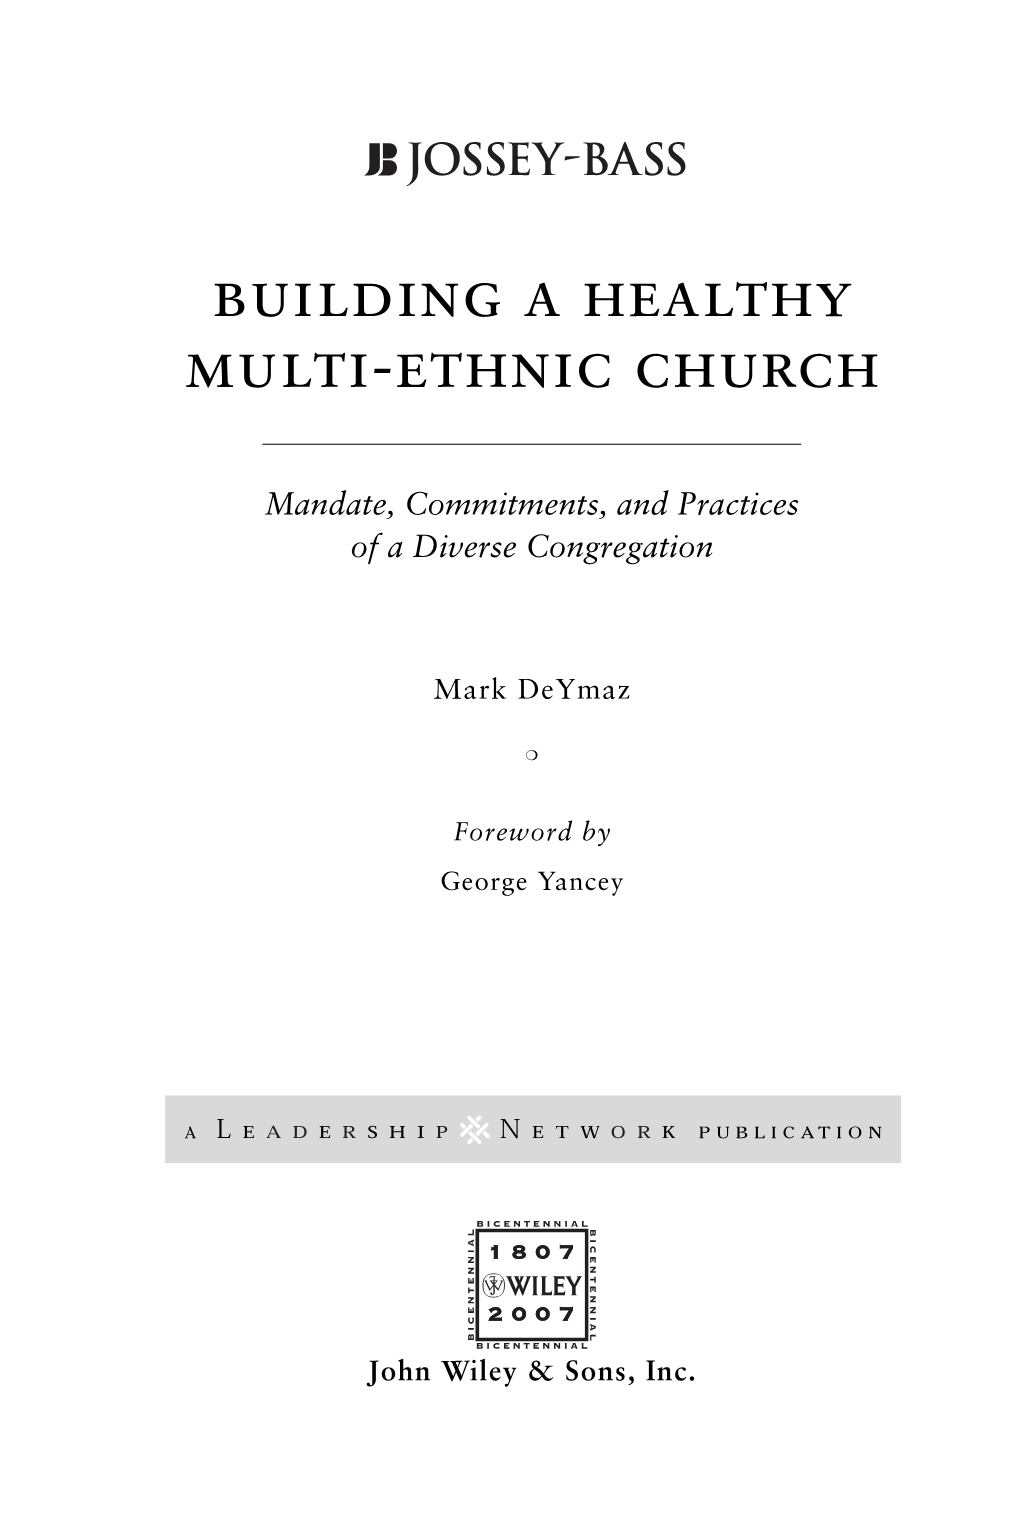 BUILDING a Healthy MULTIHETHNIC CHURCH